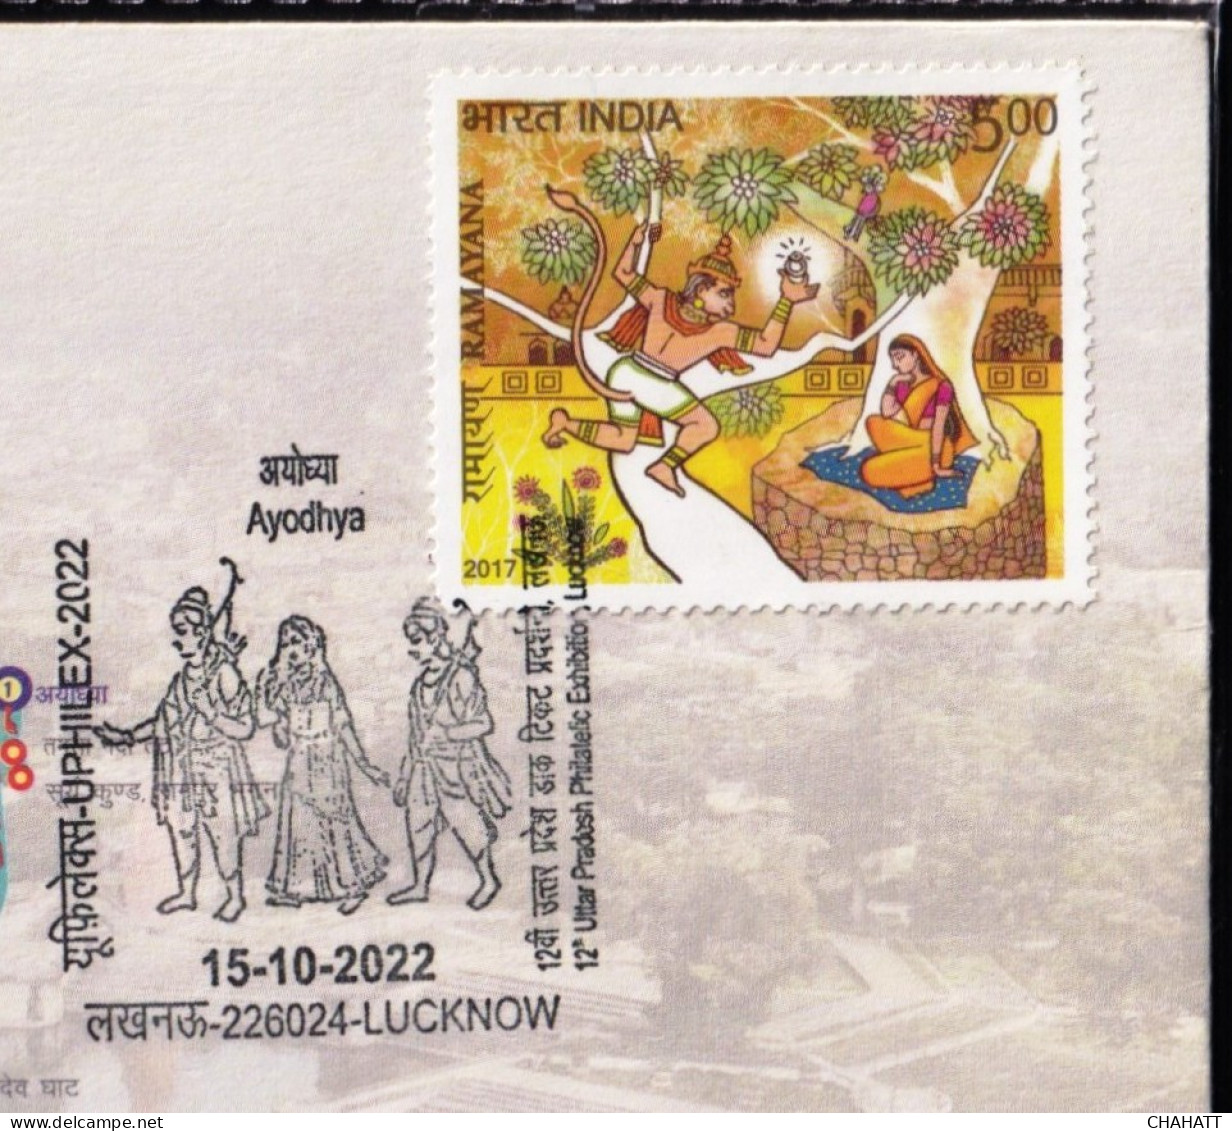 HINDUISM - RAMAYAN-  ARCHERY, AYODHYA - PICTORIAL CANCELLATION - SPECIAL COVER - INDIA -2022- BX4-23 - Hinduismo